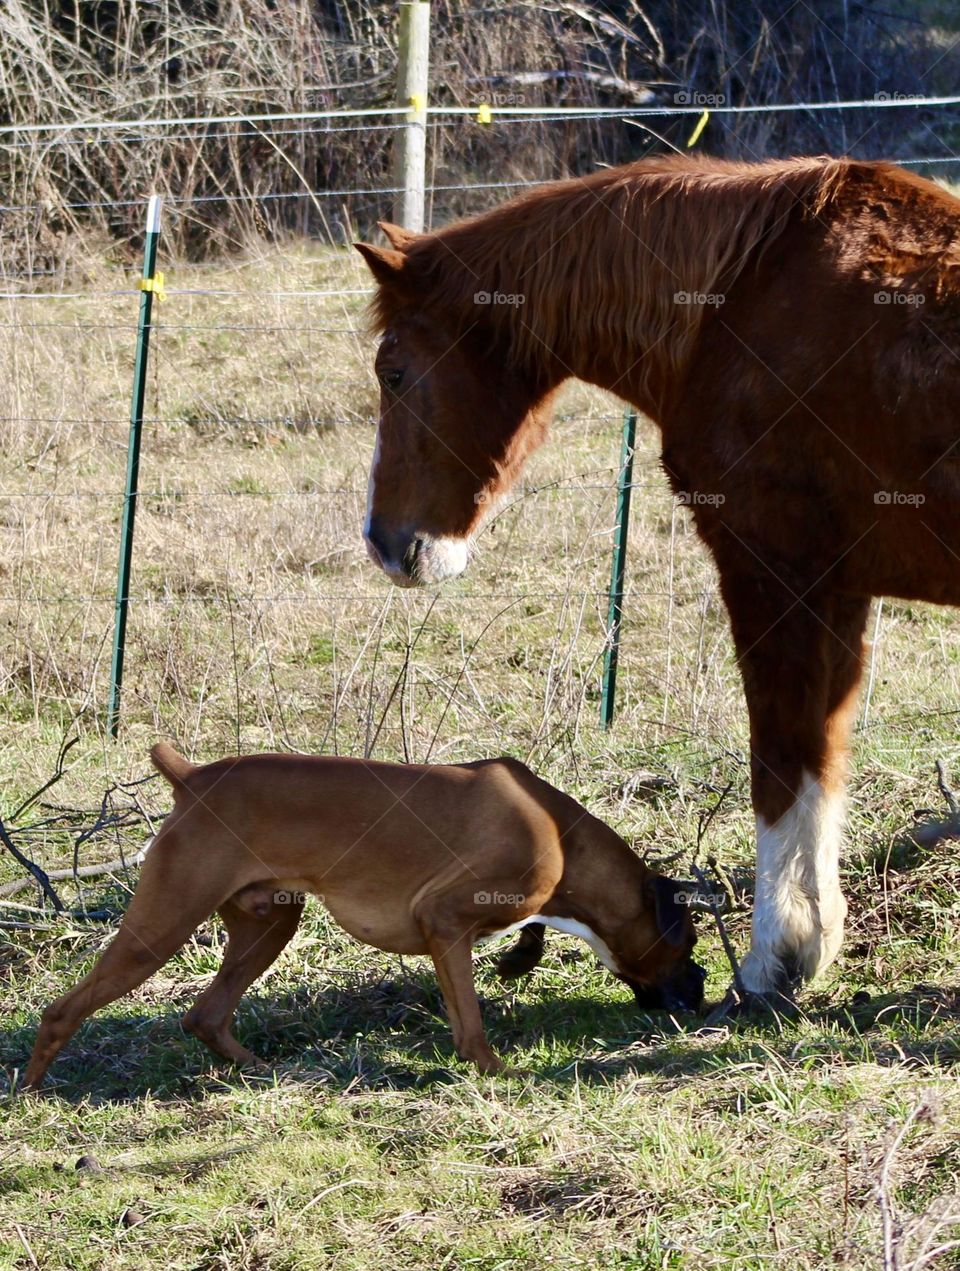 Boxer checking out a large horse